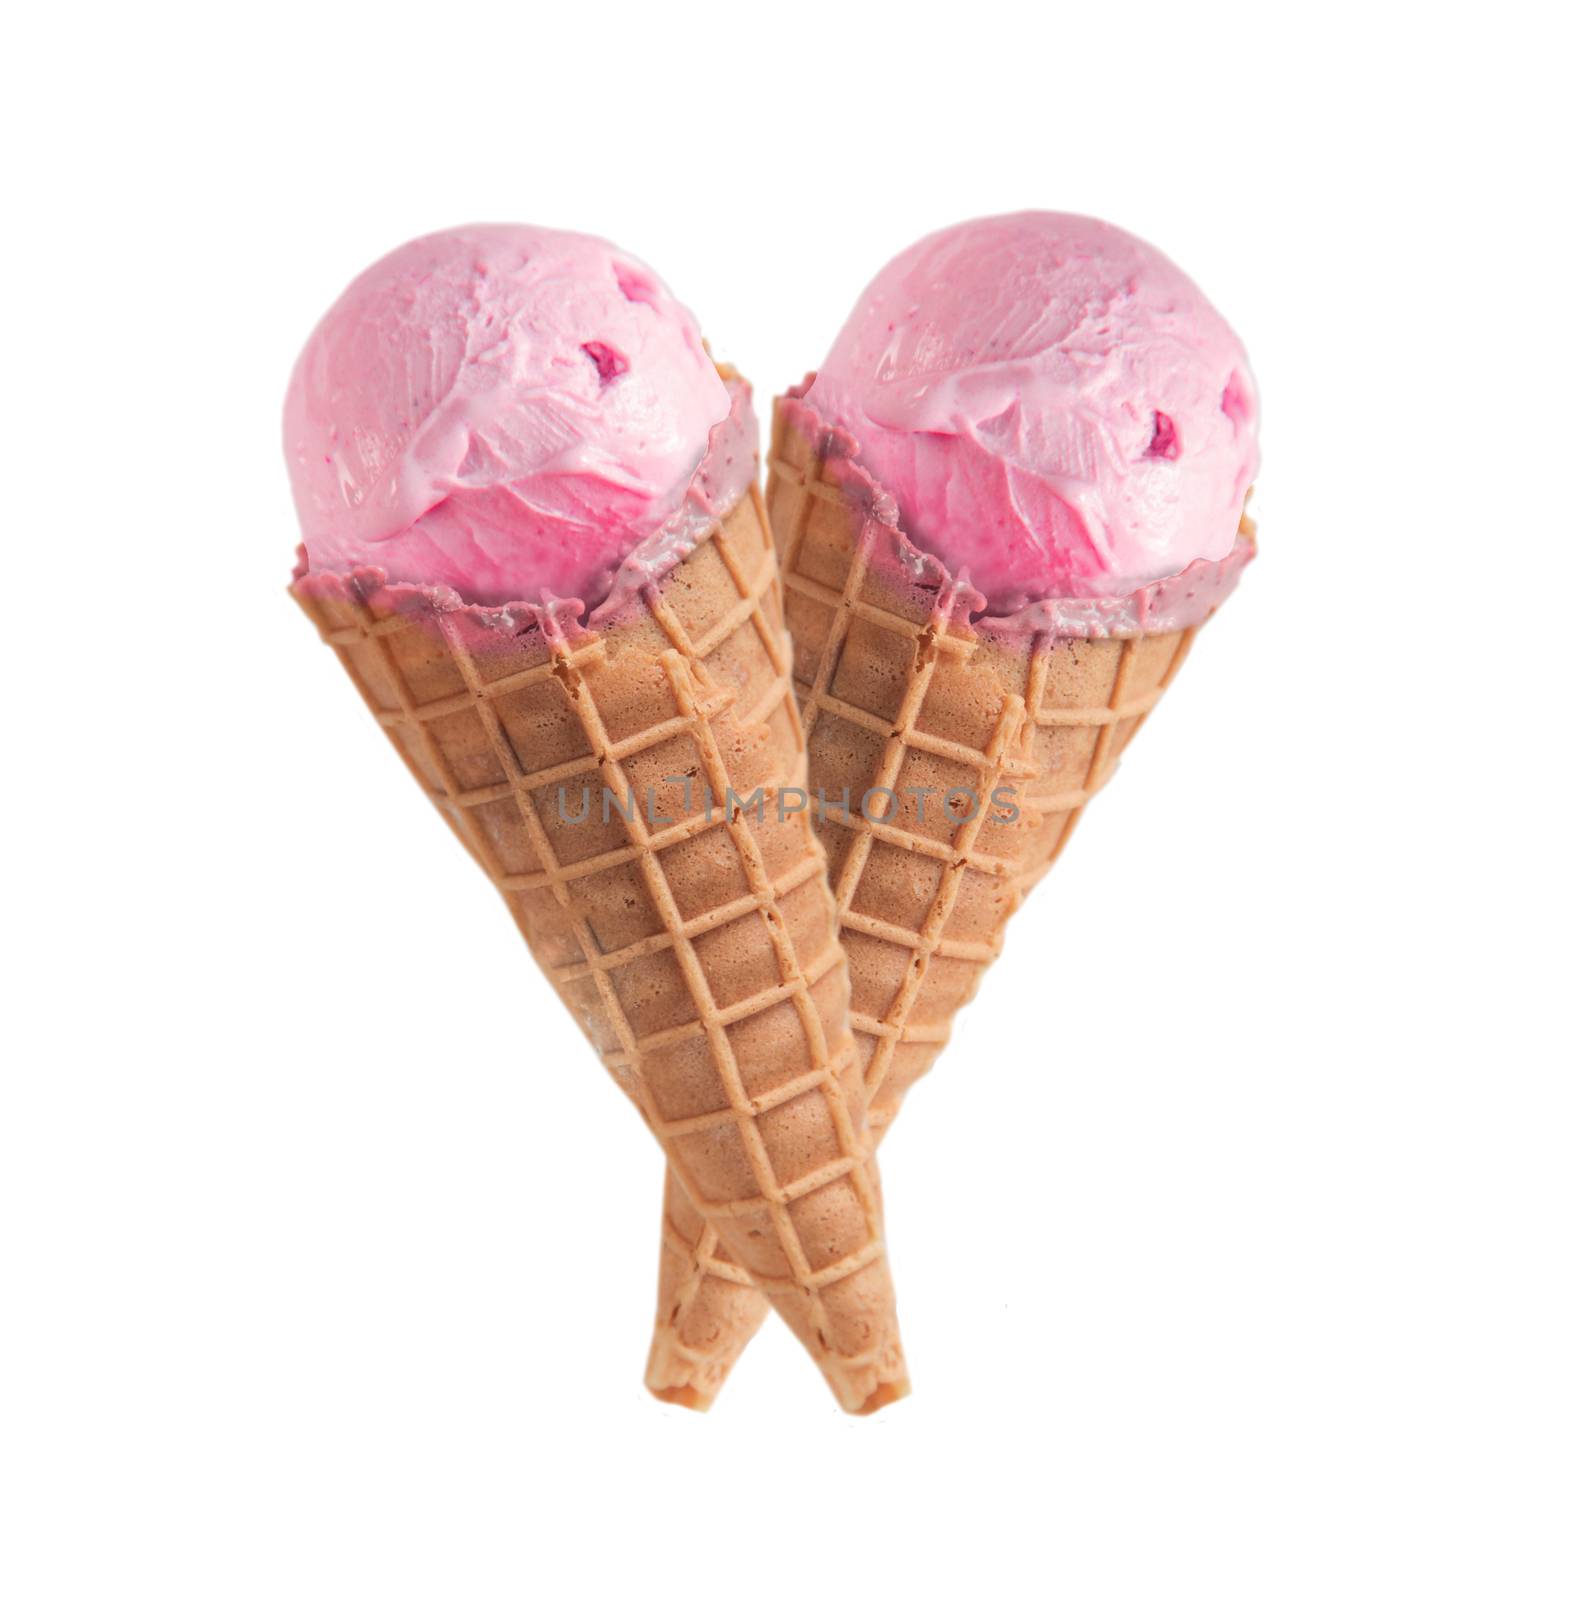 Two strawberry flavor ice cream cones in a heart shape

